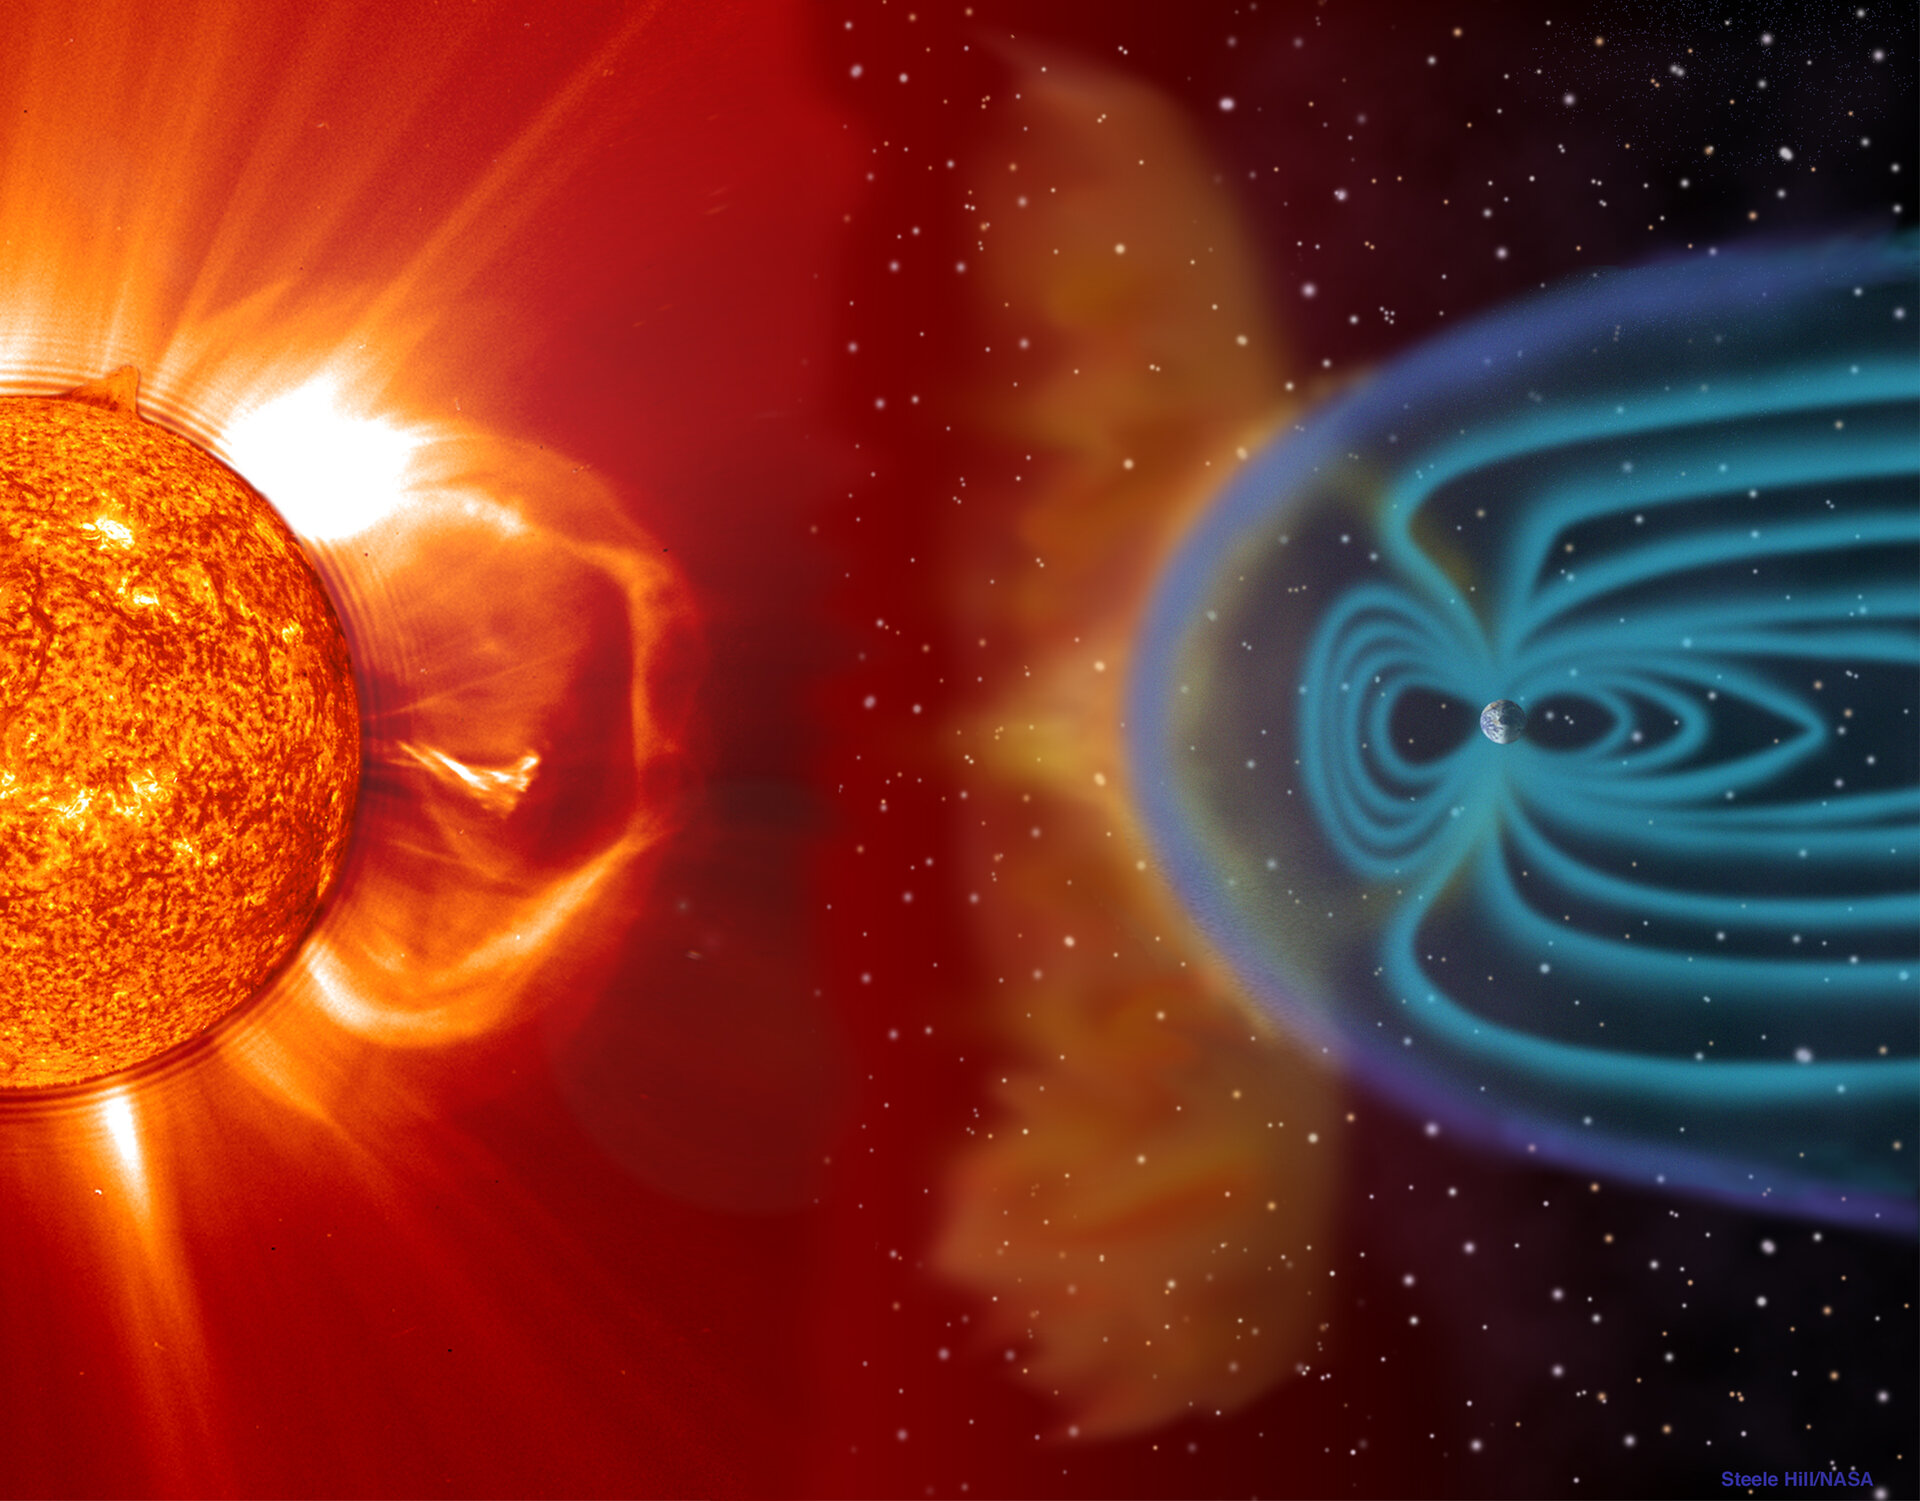 Coronal mass ejection (CME) blast and subsequent impact at Earth